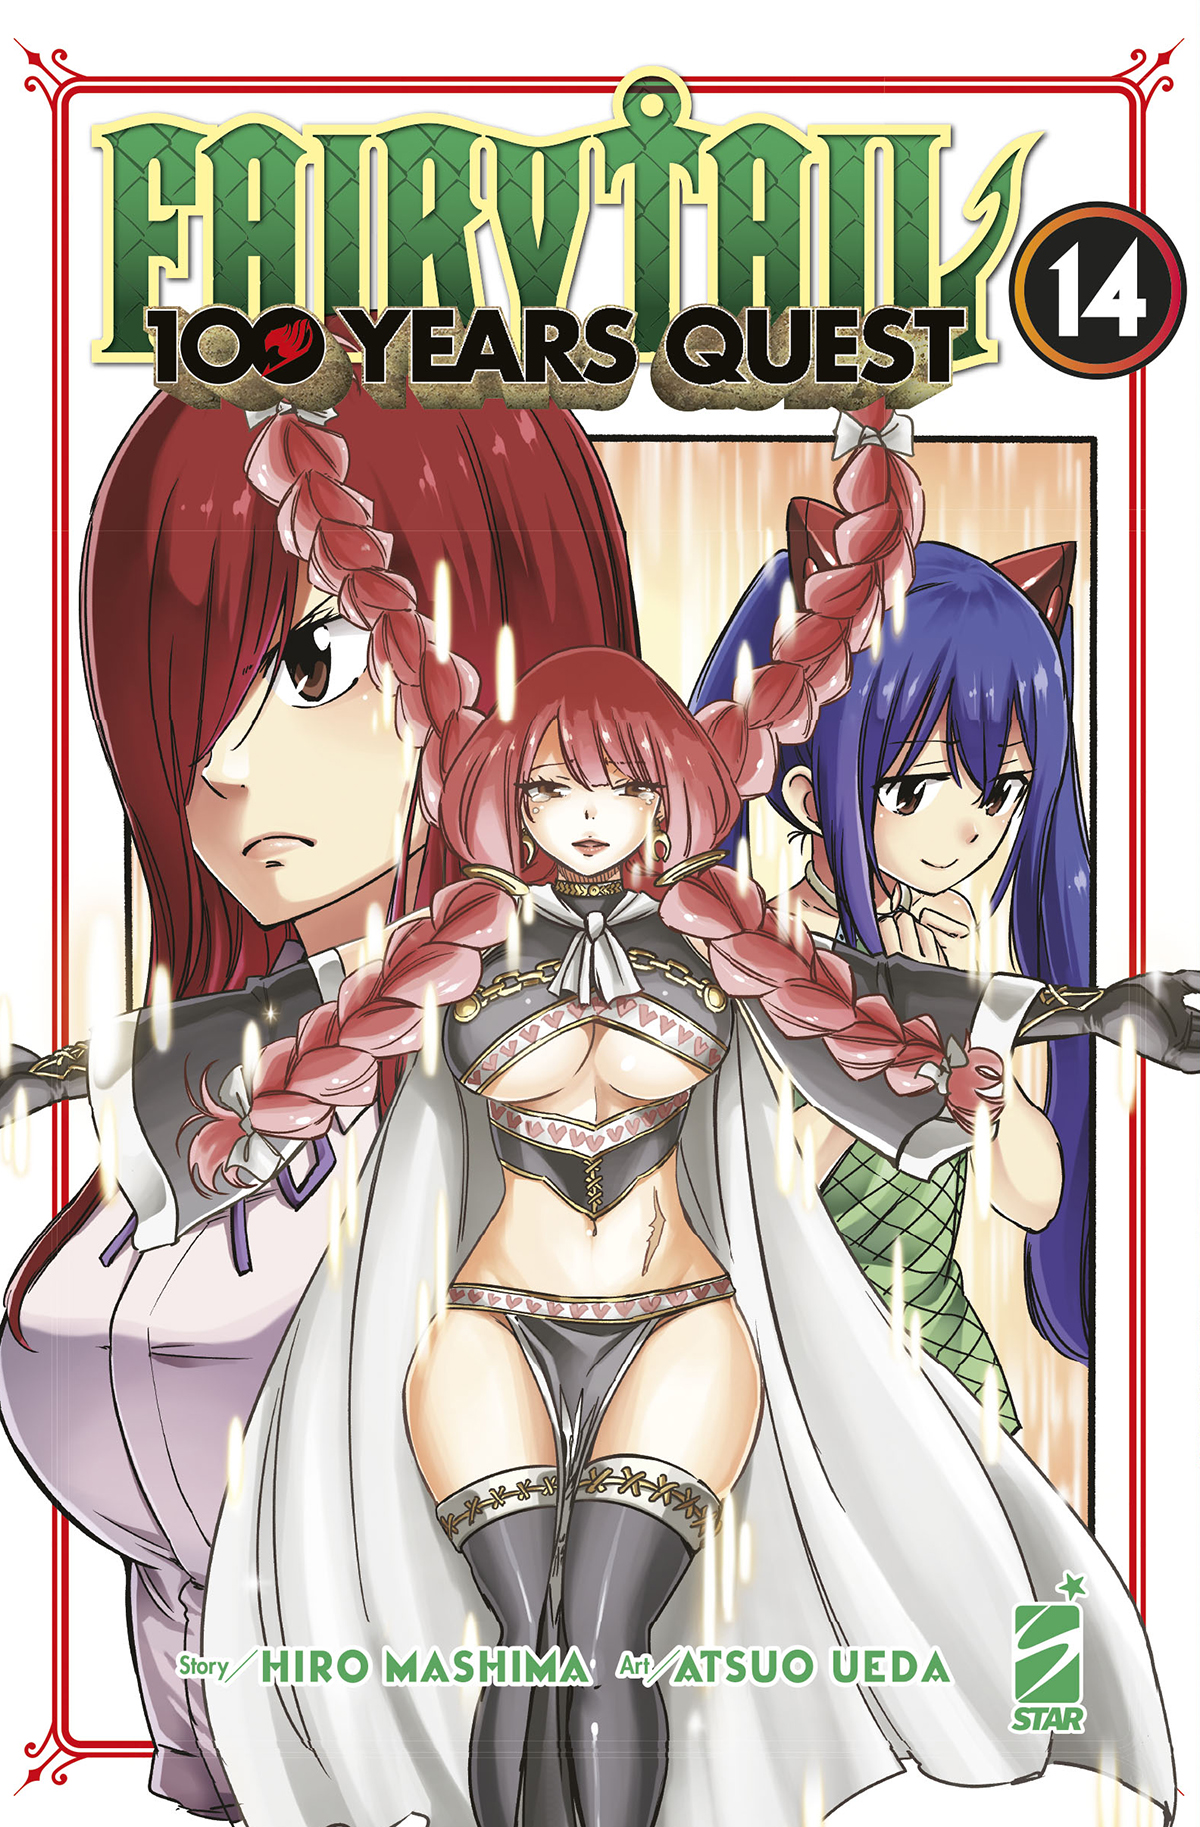 YOUNG #348 FAIRY TAIL 100 YEARS QUEST N.14